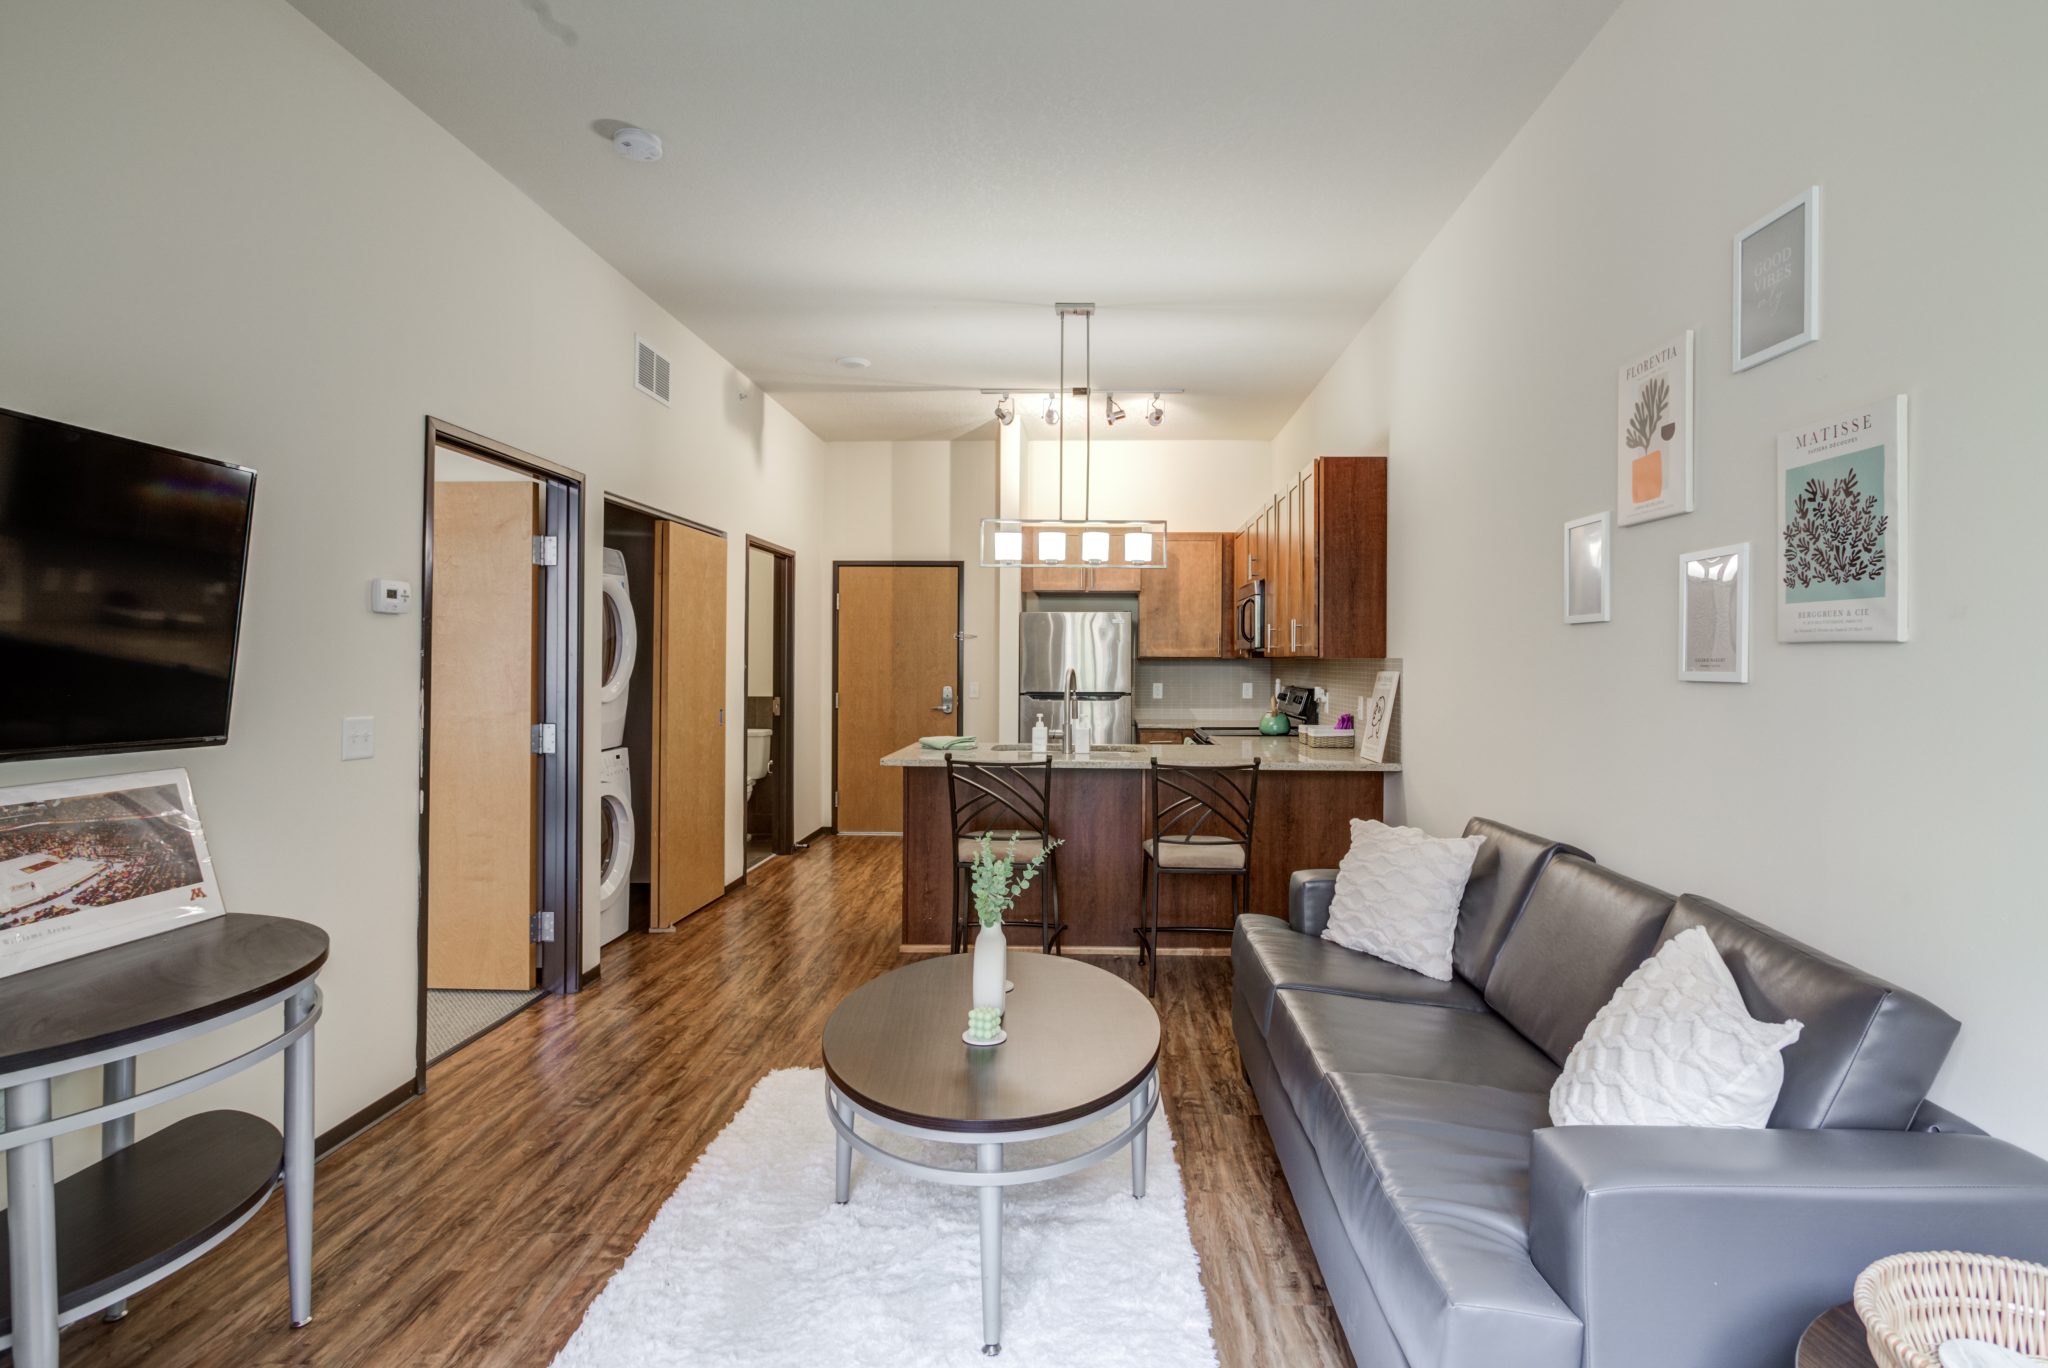 the knoll dinkytown off campus apartments near the university of minnesota fully furnished living room to kitchen in unit washer and dryer